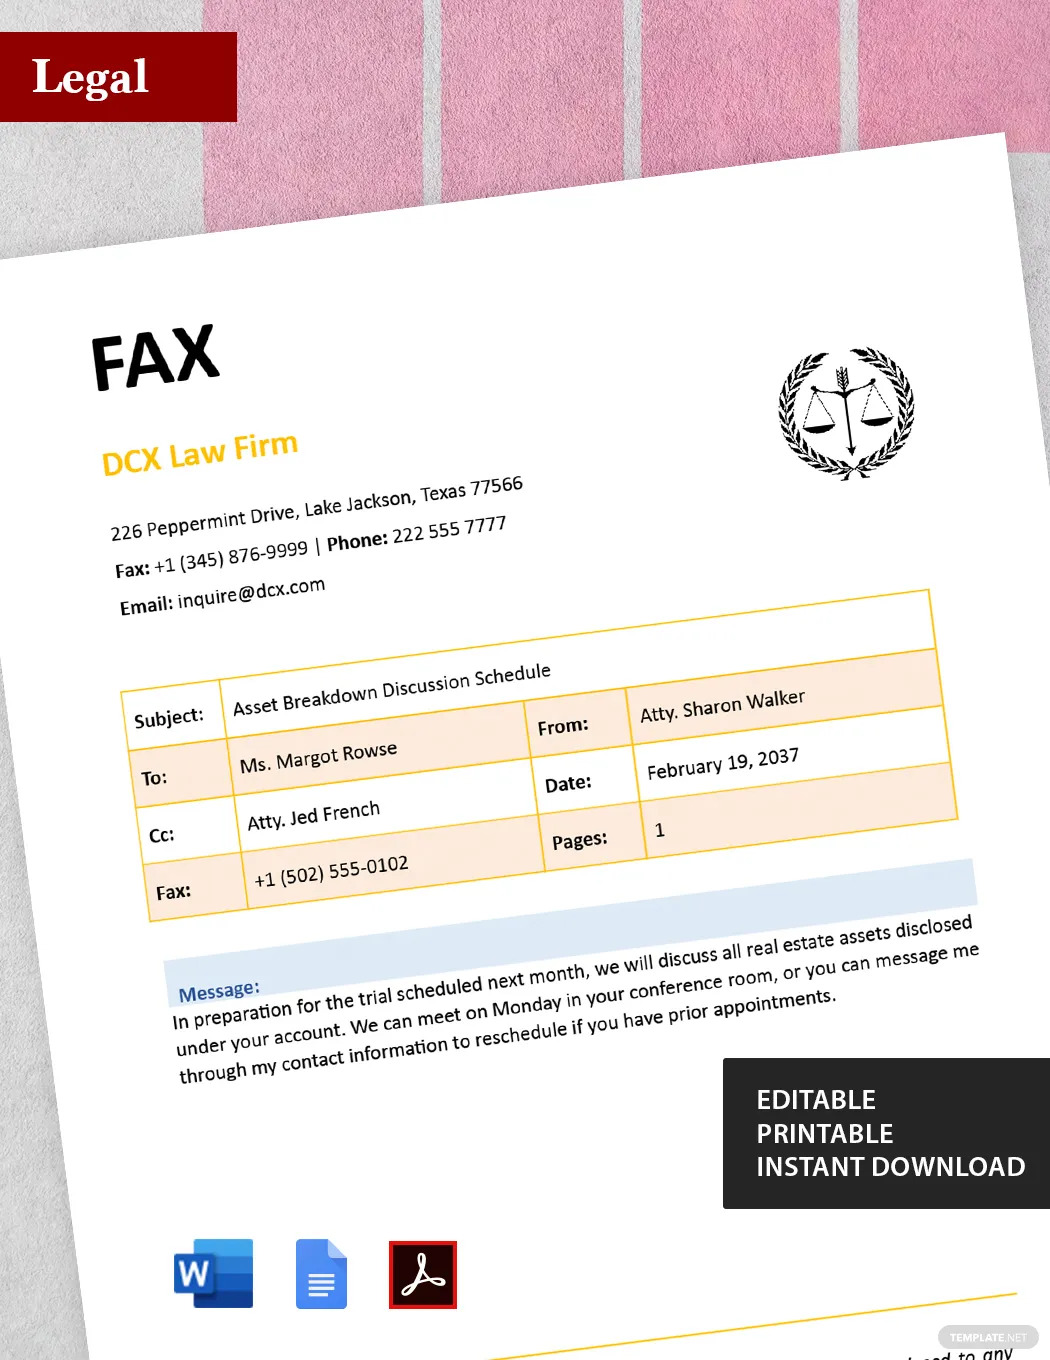 real-estate-fax-cover-sheet-ideas-and-examples